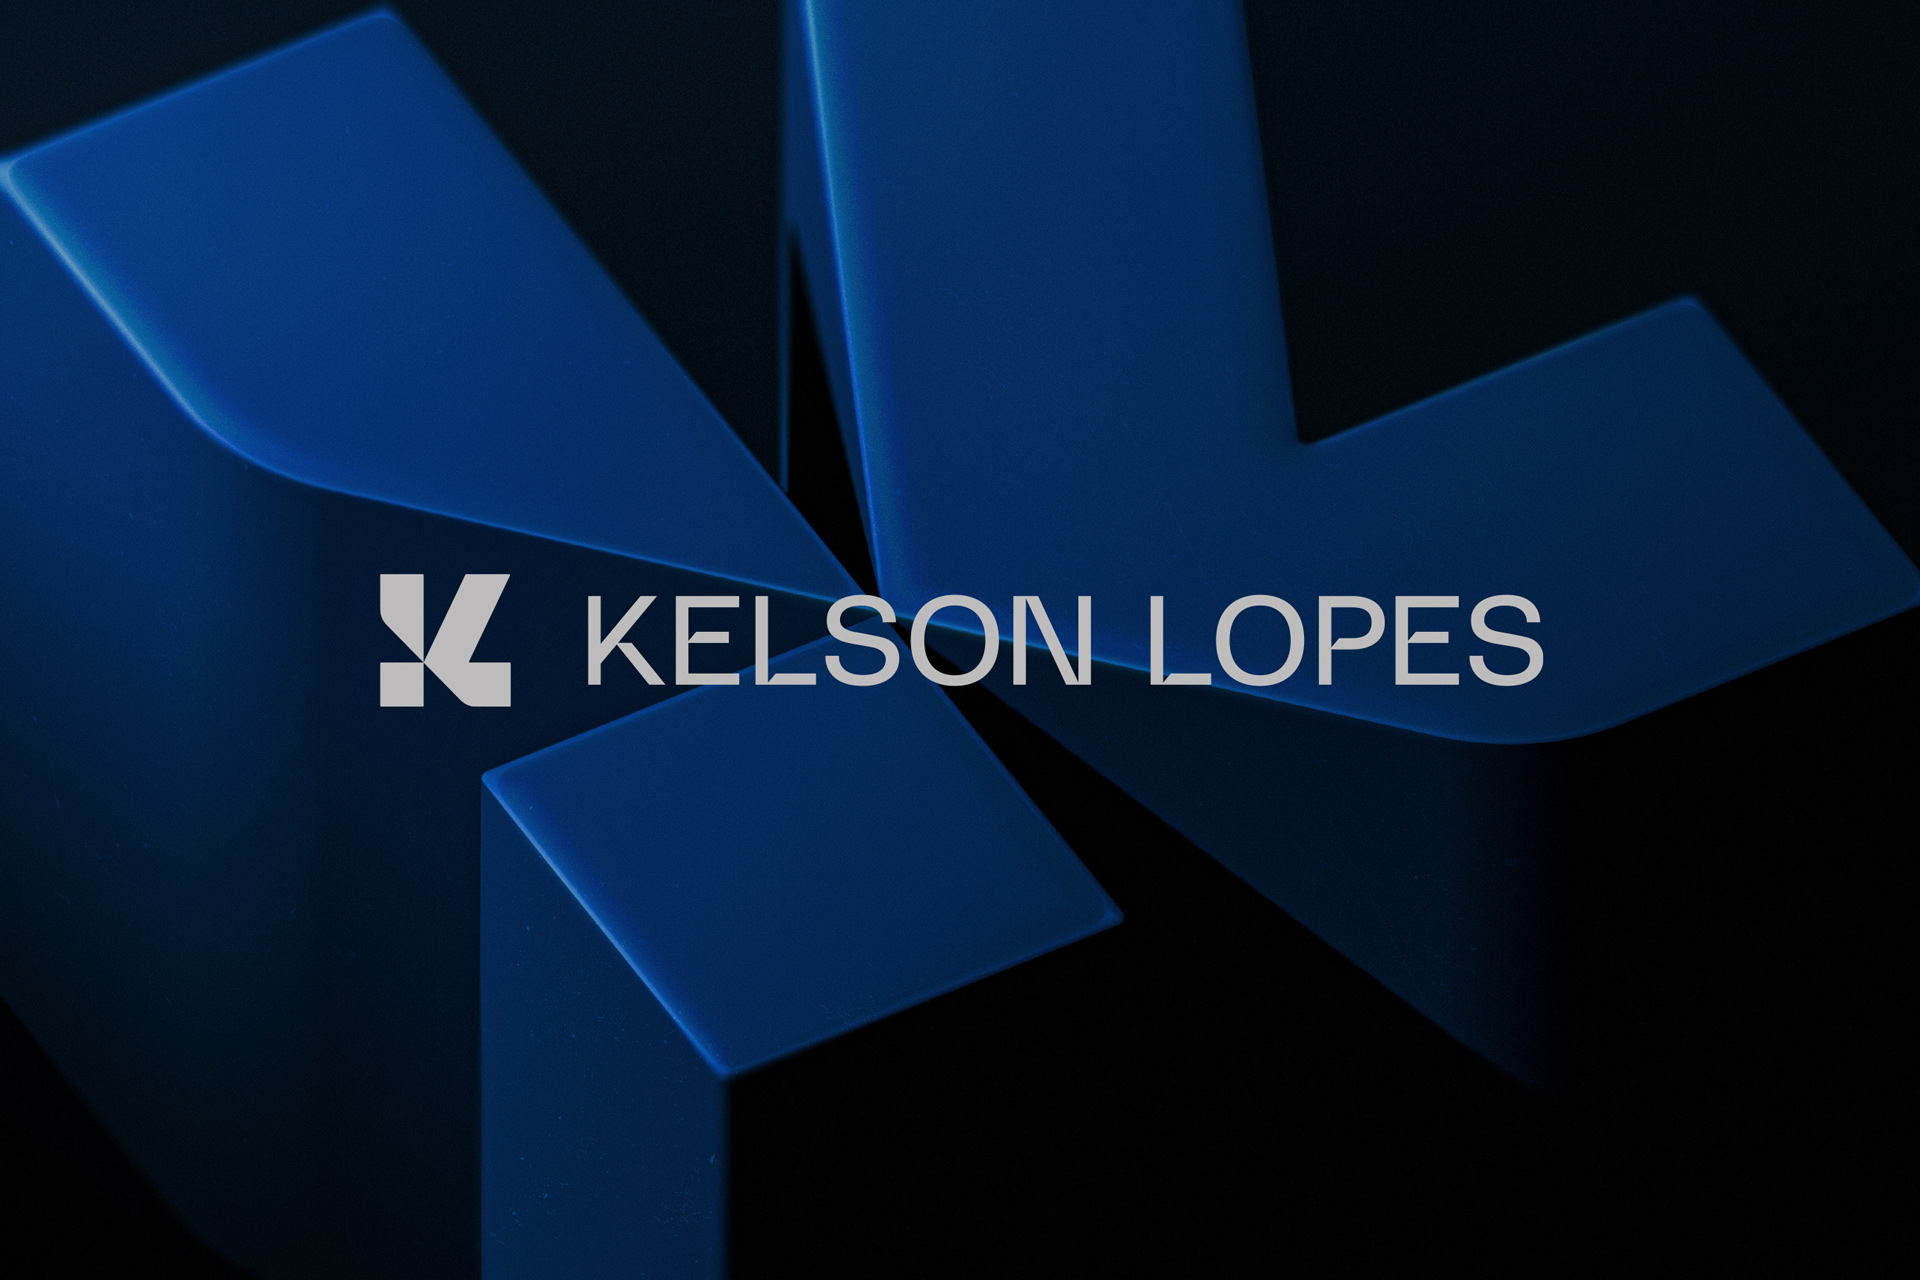 Visual Identity for Kelson Lopes by Lucas Coradi